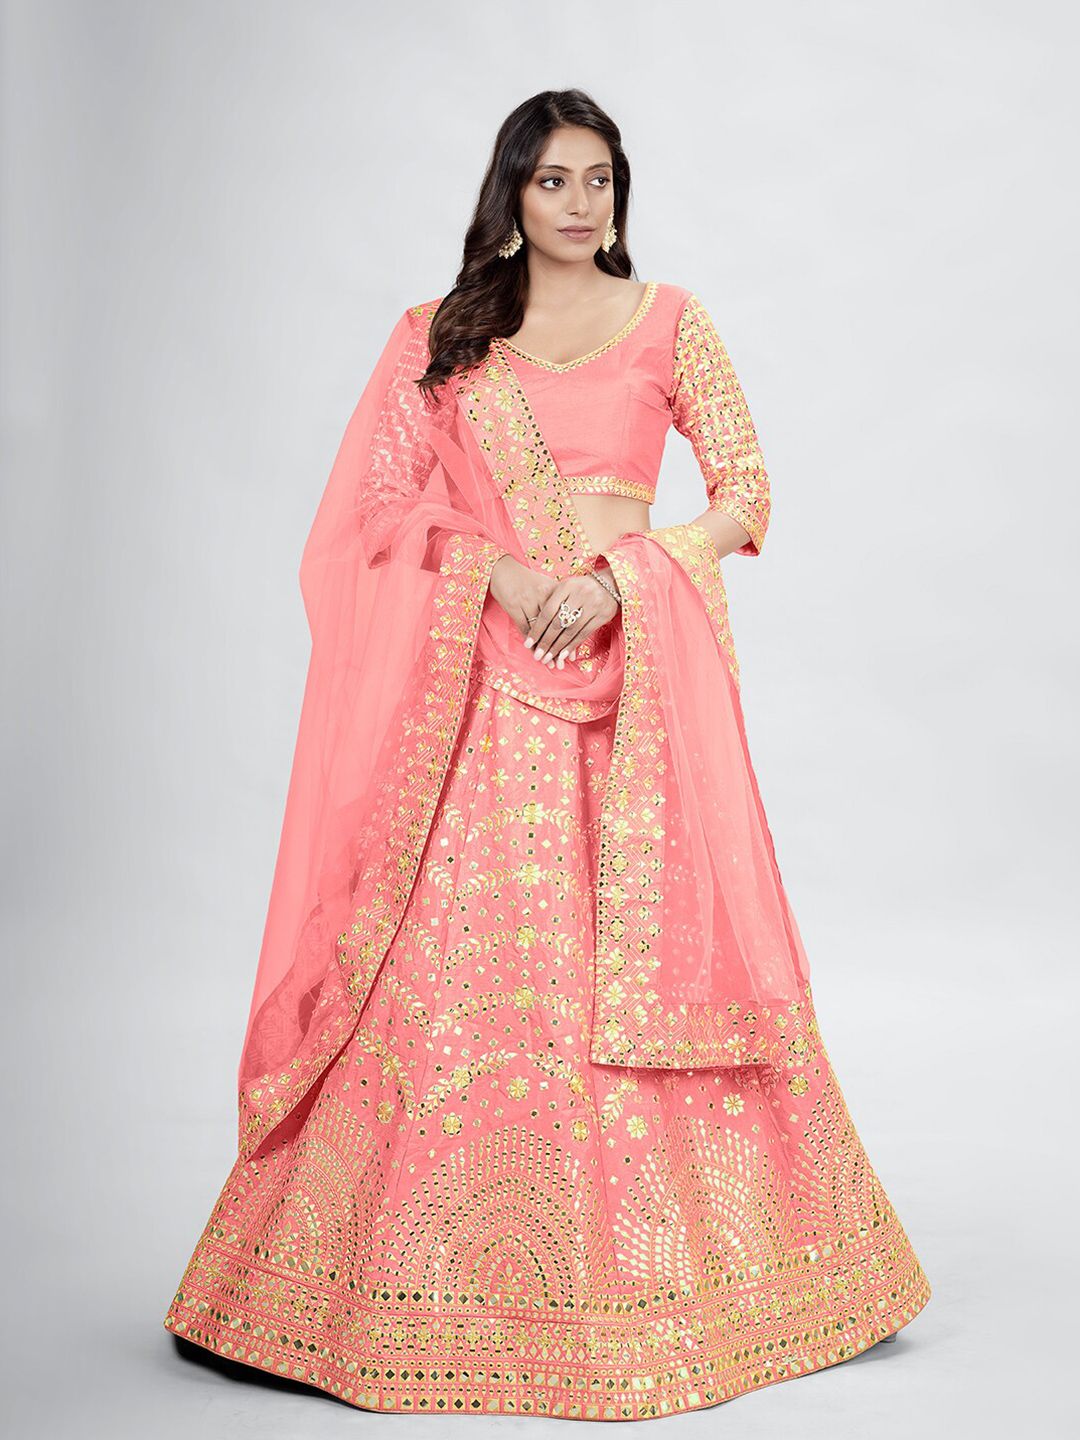 DRESSTIVE Pink & Gold-Toned Embroidered Mirror Work Semi-Stitched Lehenga & Unstitched Blouse With Dupatta Price in India